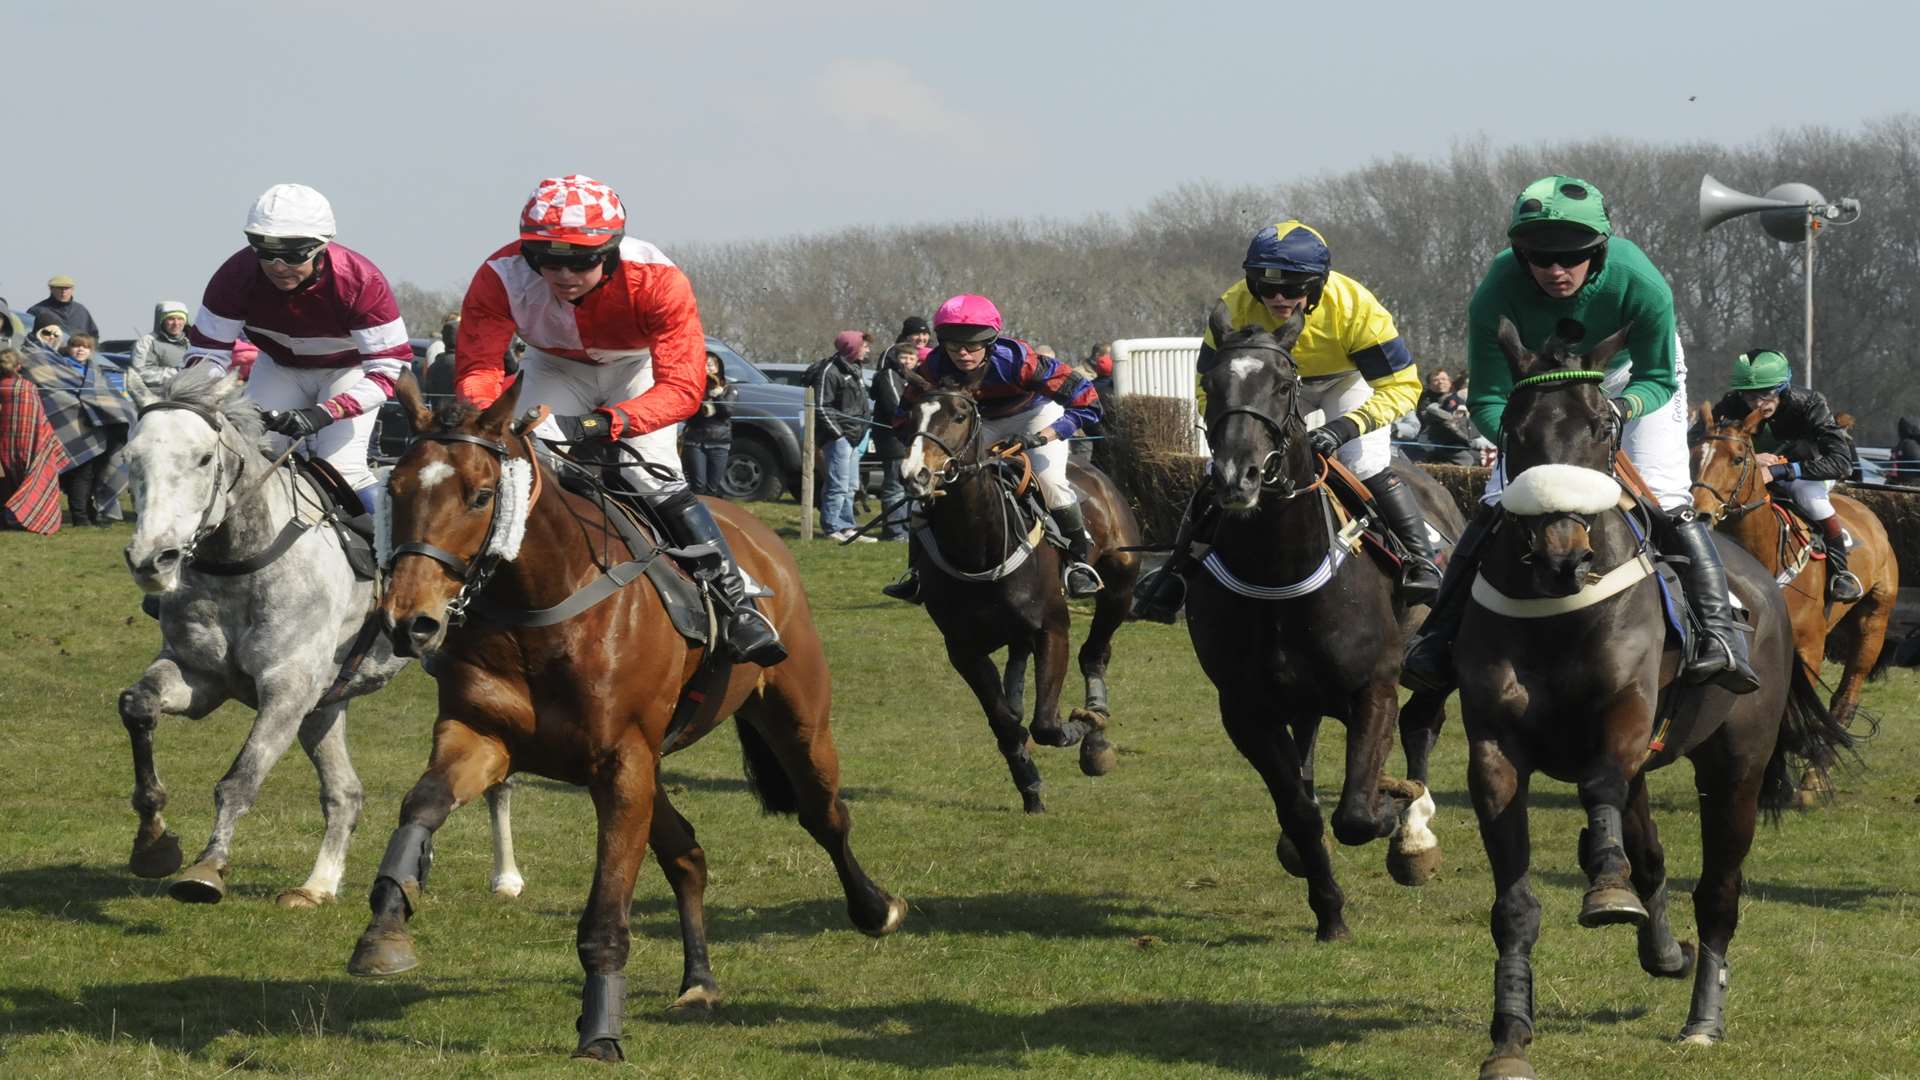 There will also be racing at Aldington, near Ashford, this weekend